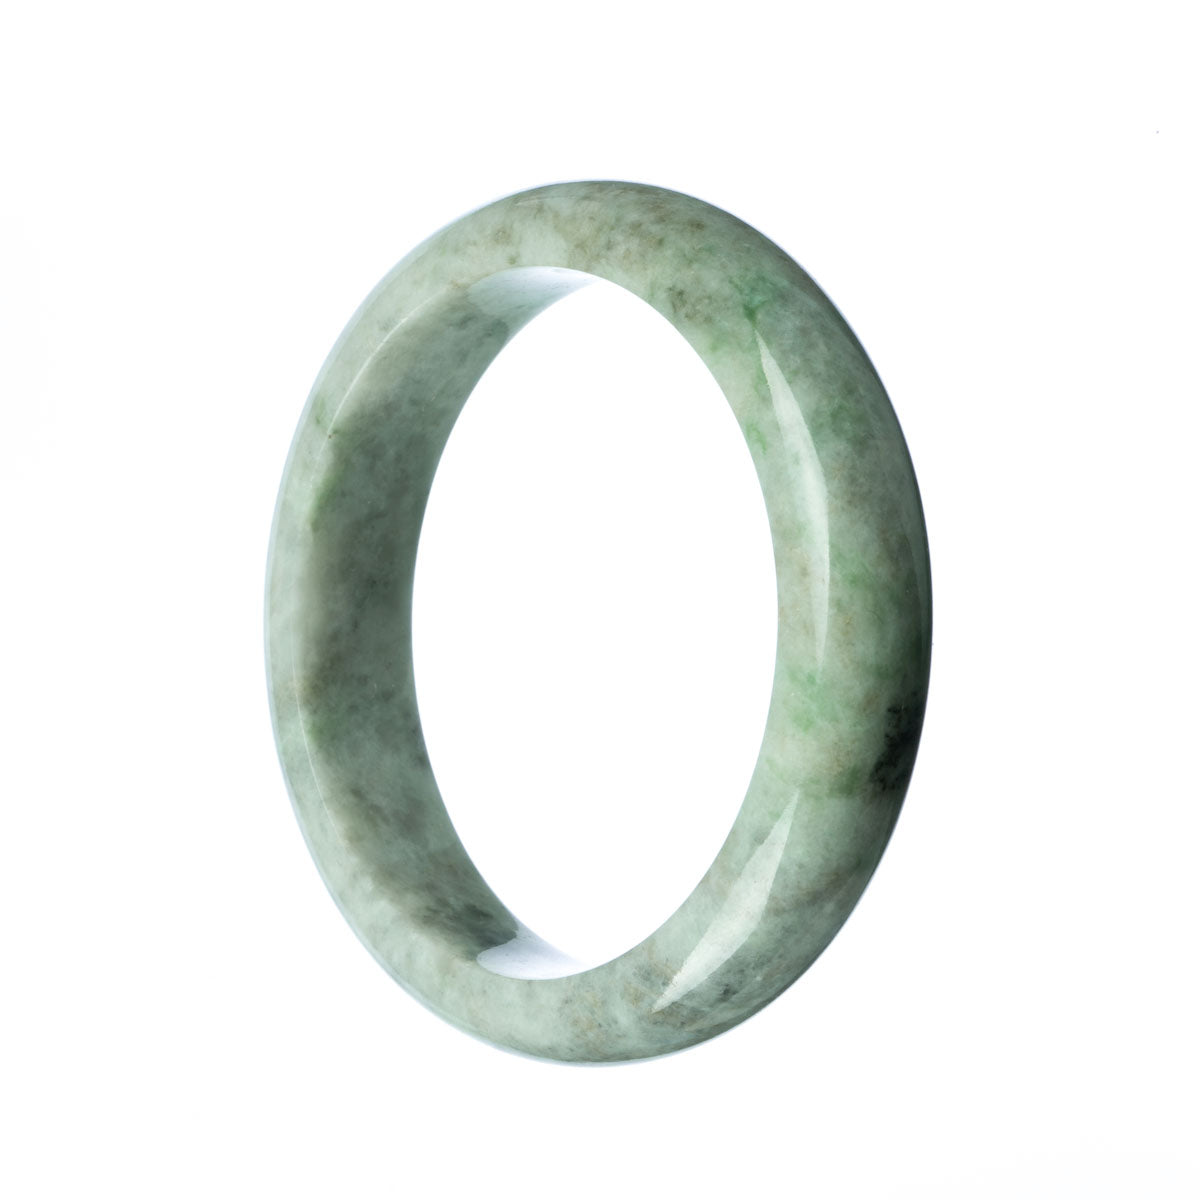 A half-moon shaped grey jadeite bangle bracelet with an authentic and natural appearance, measuring 63mm in size. Designed and sold by MAYS.